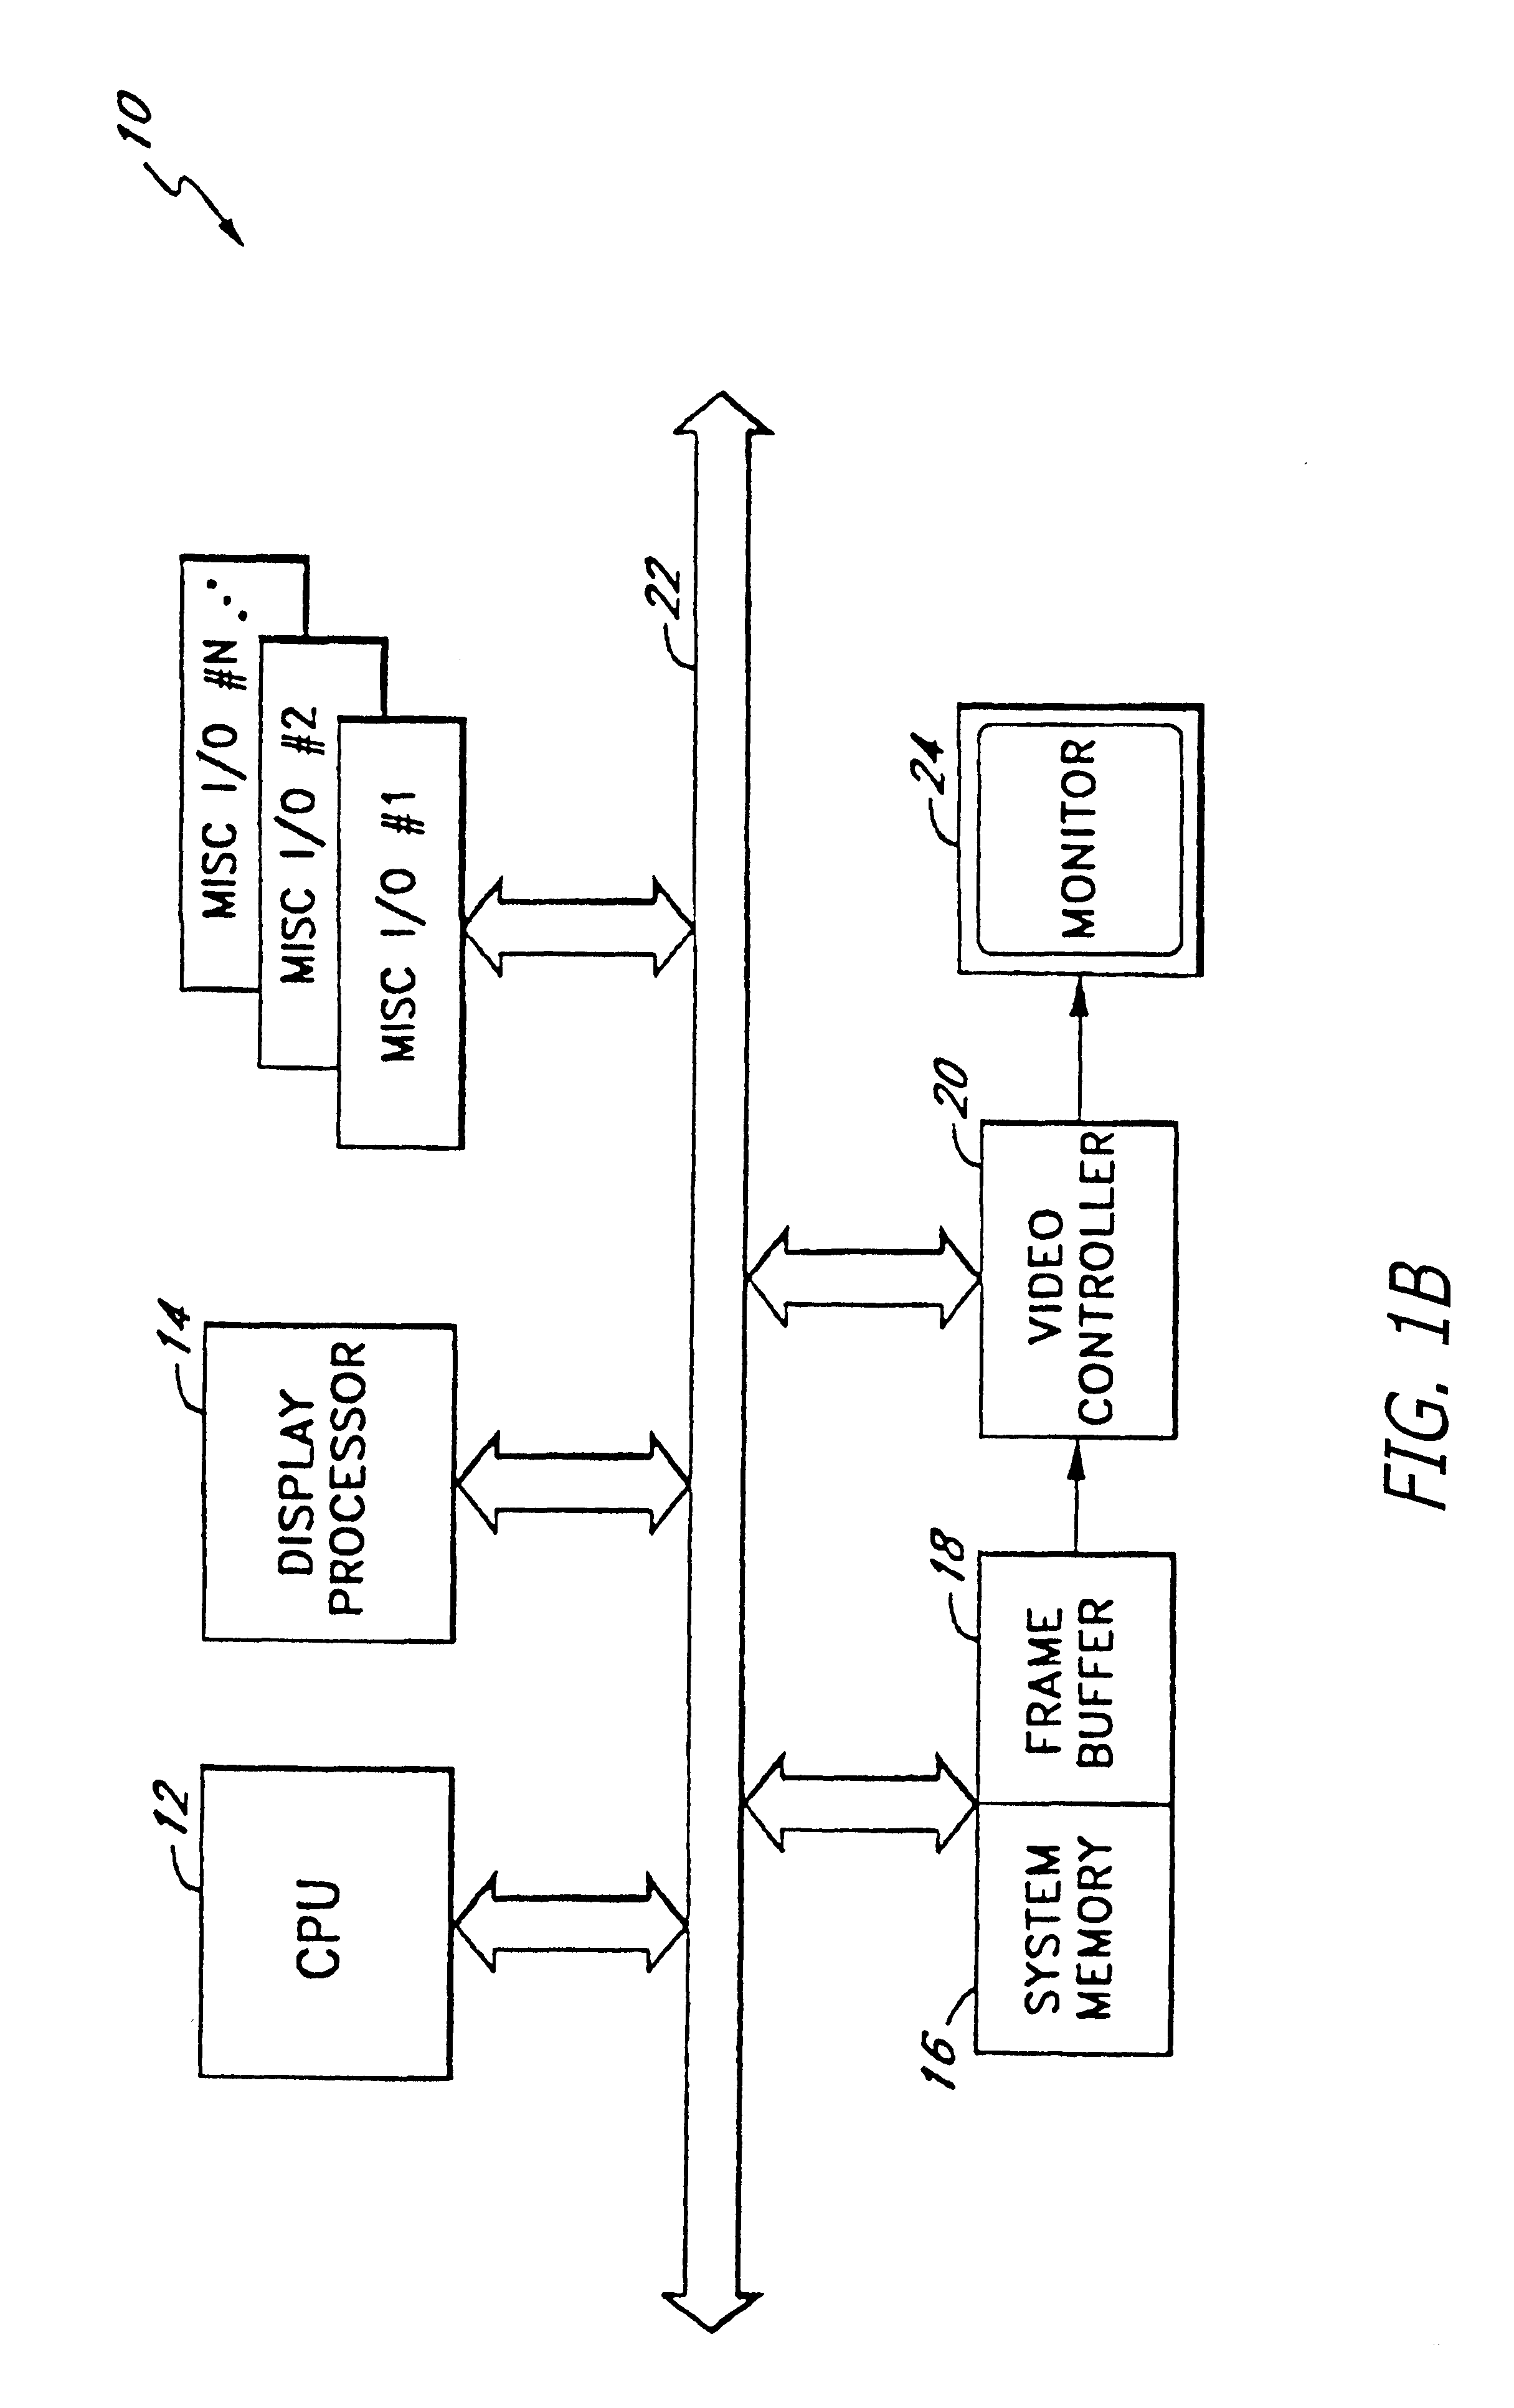 Method and apparatus for providing remote access, control of remote systems and updating of display information